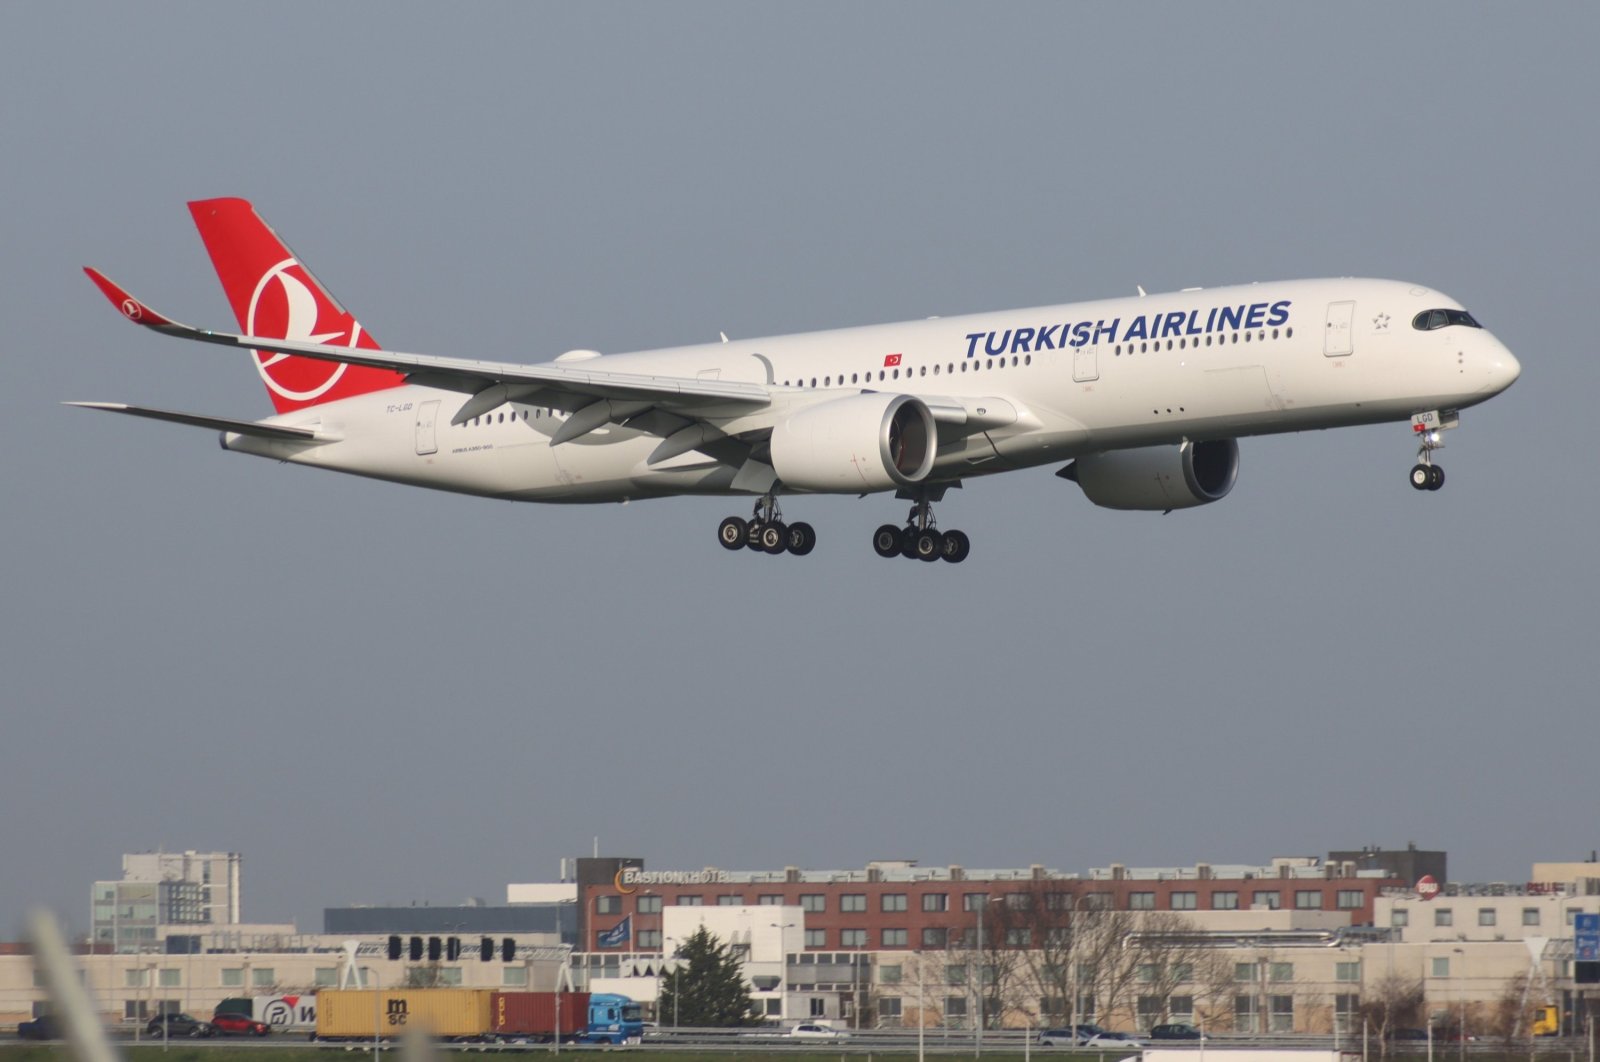 A Turkish Airlines Airbus A350-900 aircraft lands at Schiphol Airport, Amsterdam, the Netherlands, April 1, 2021 (Getty Images)